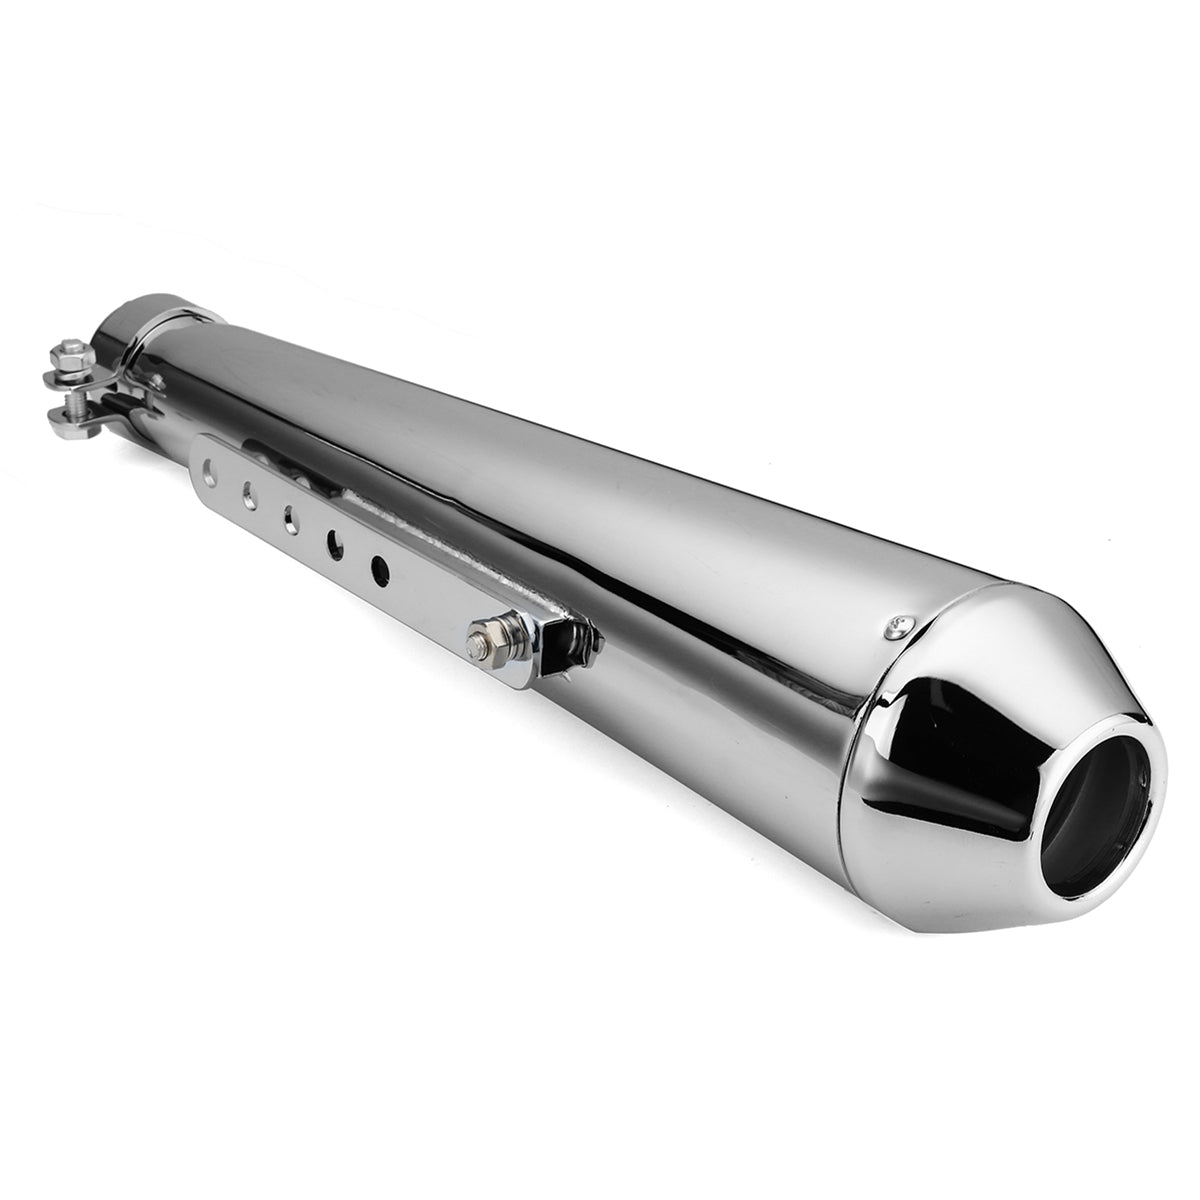 Gray Motorcycle Cafe Racer Exhaust Muffler Pipe with Sliding Bracket Universal